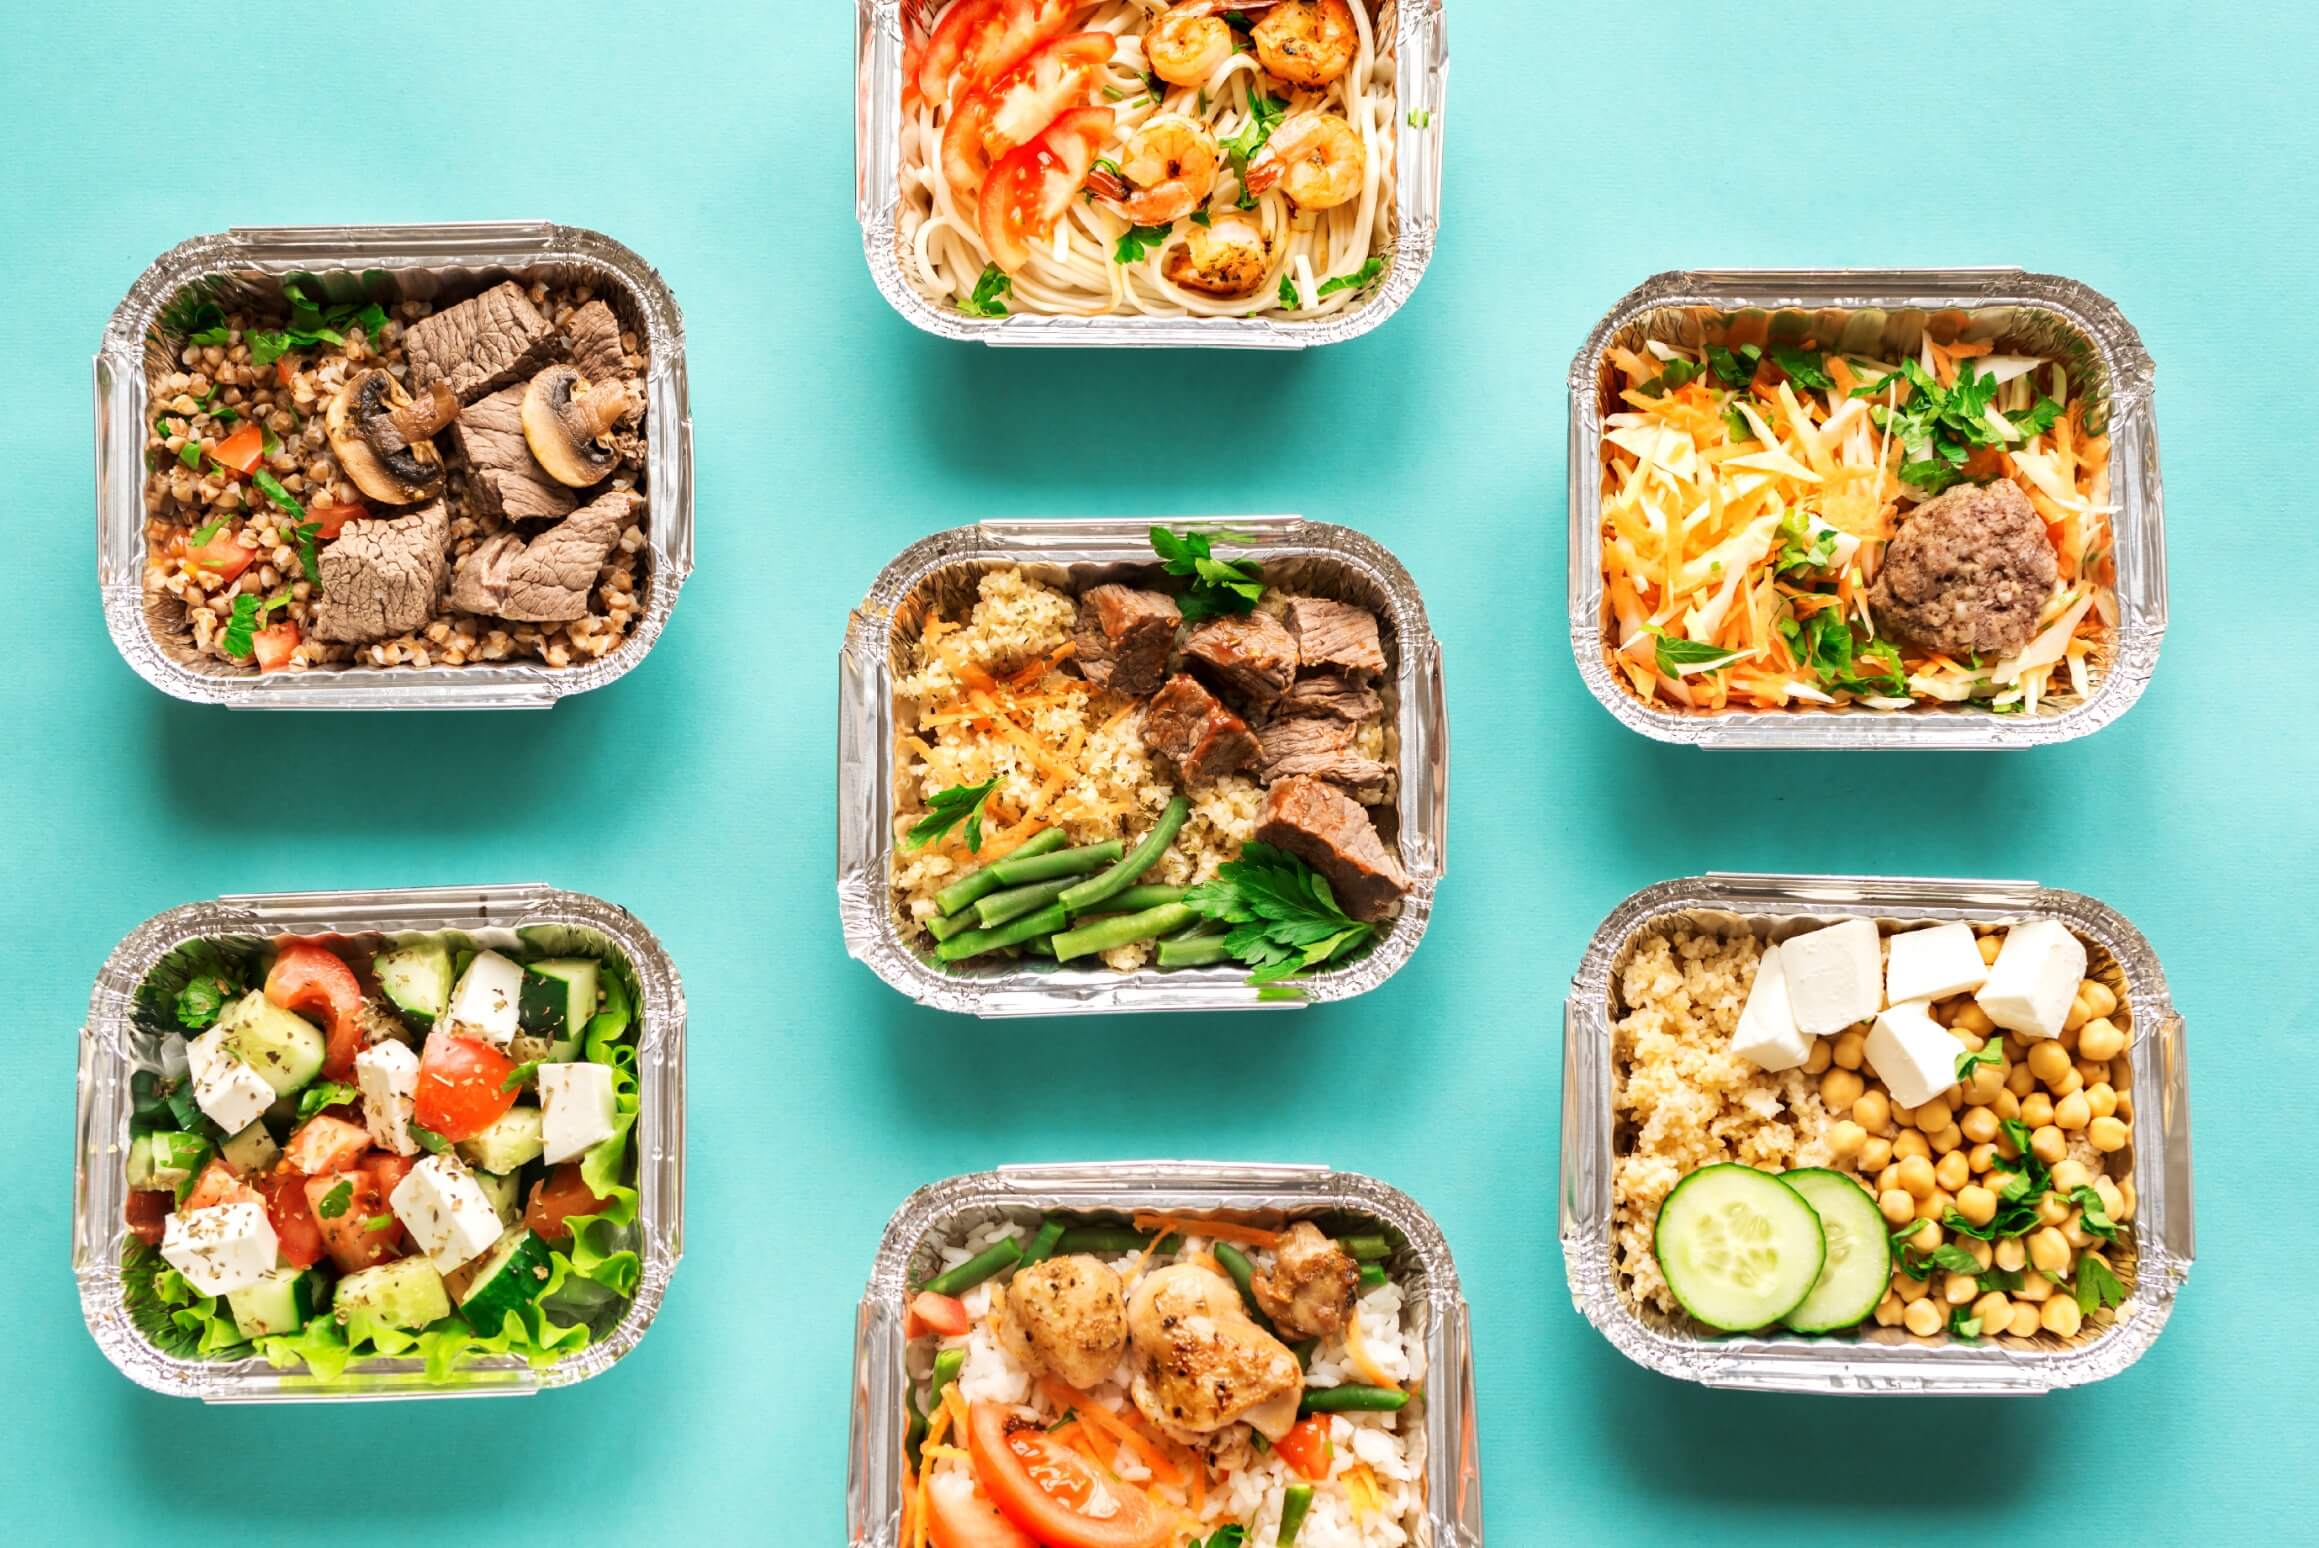 The Best Meal Kit Delivery Services Right Now (2022 Edition)